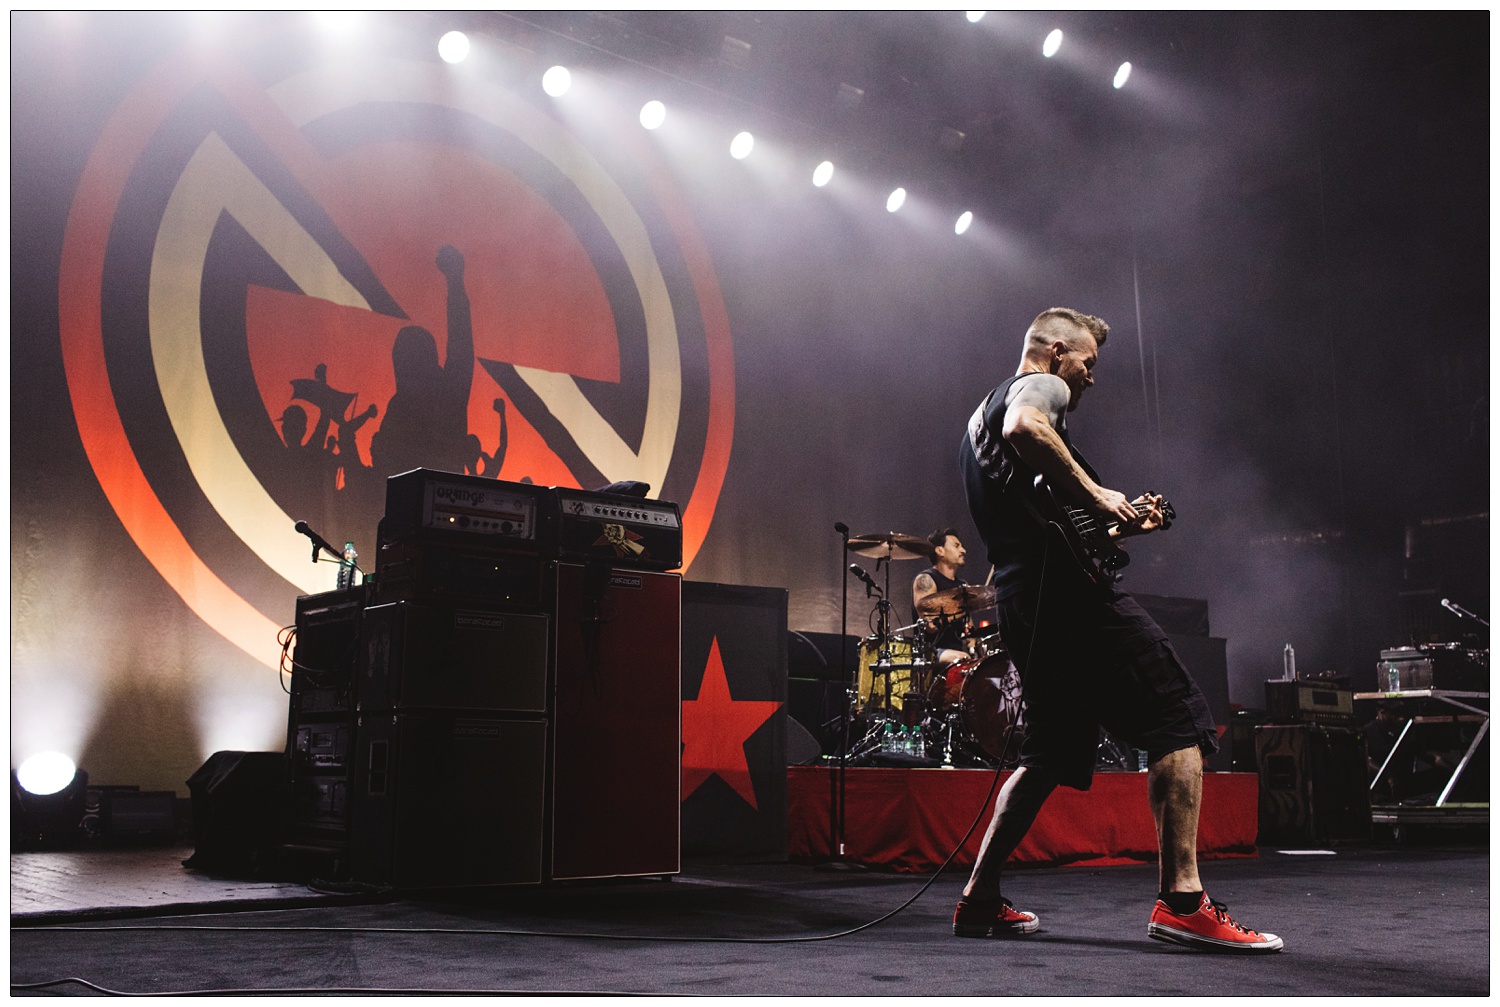 Tim Commerford on bass with Prophets of Rage.